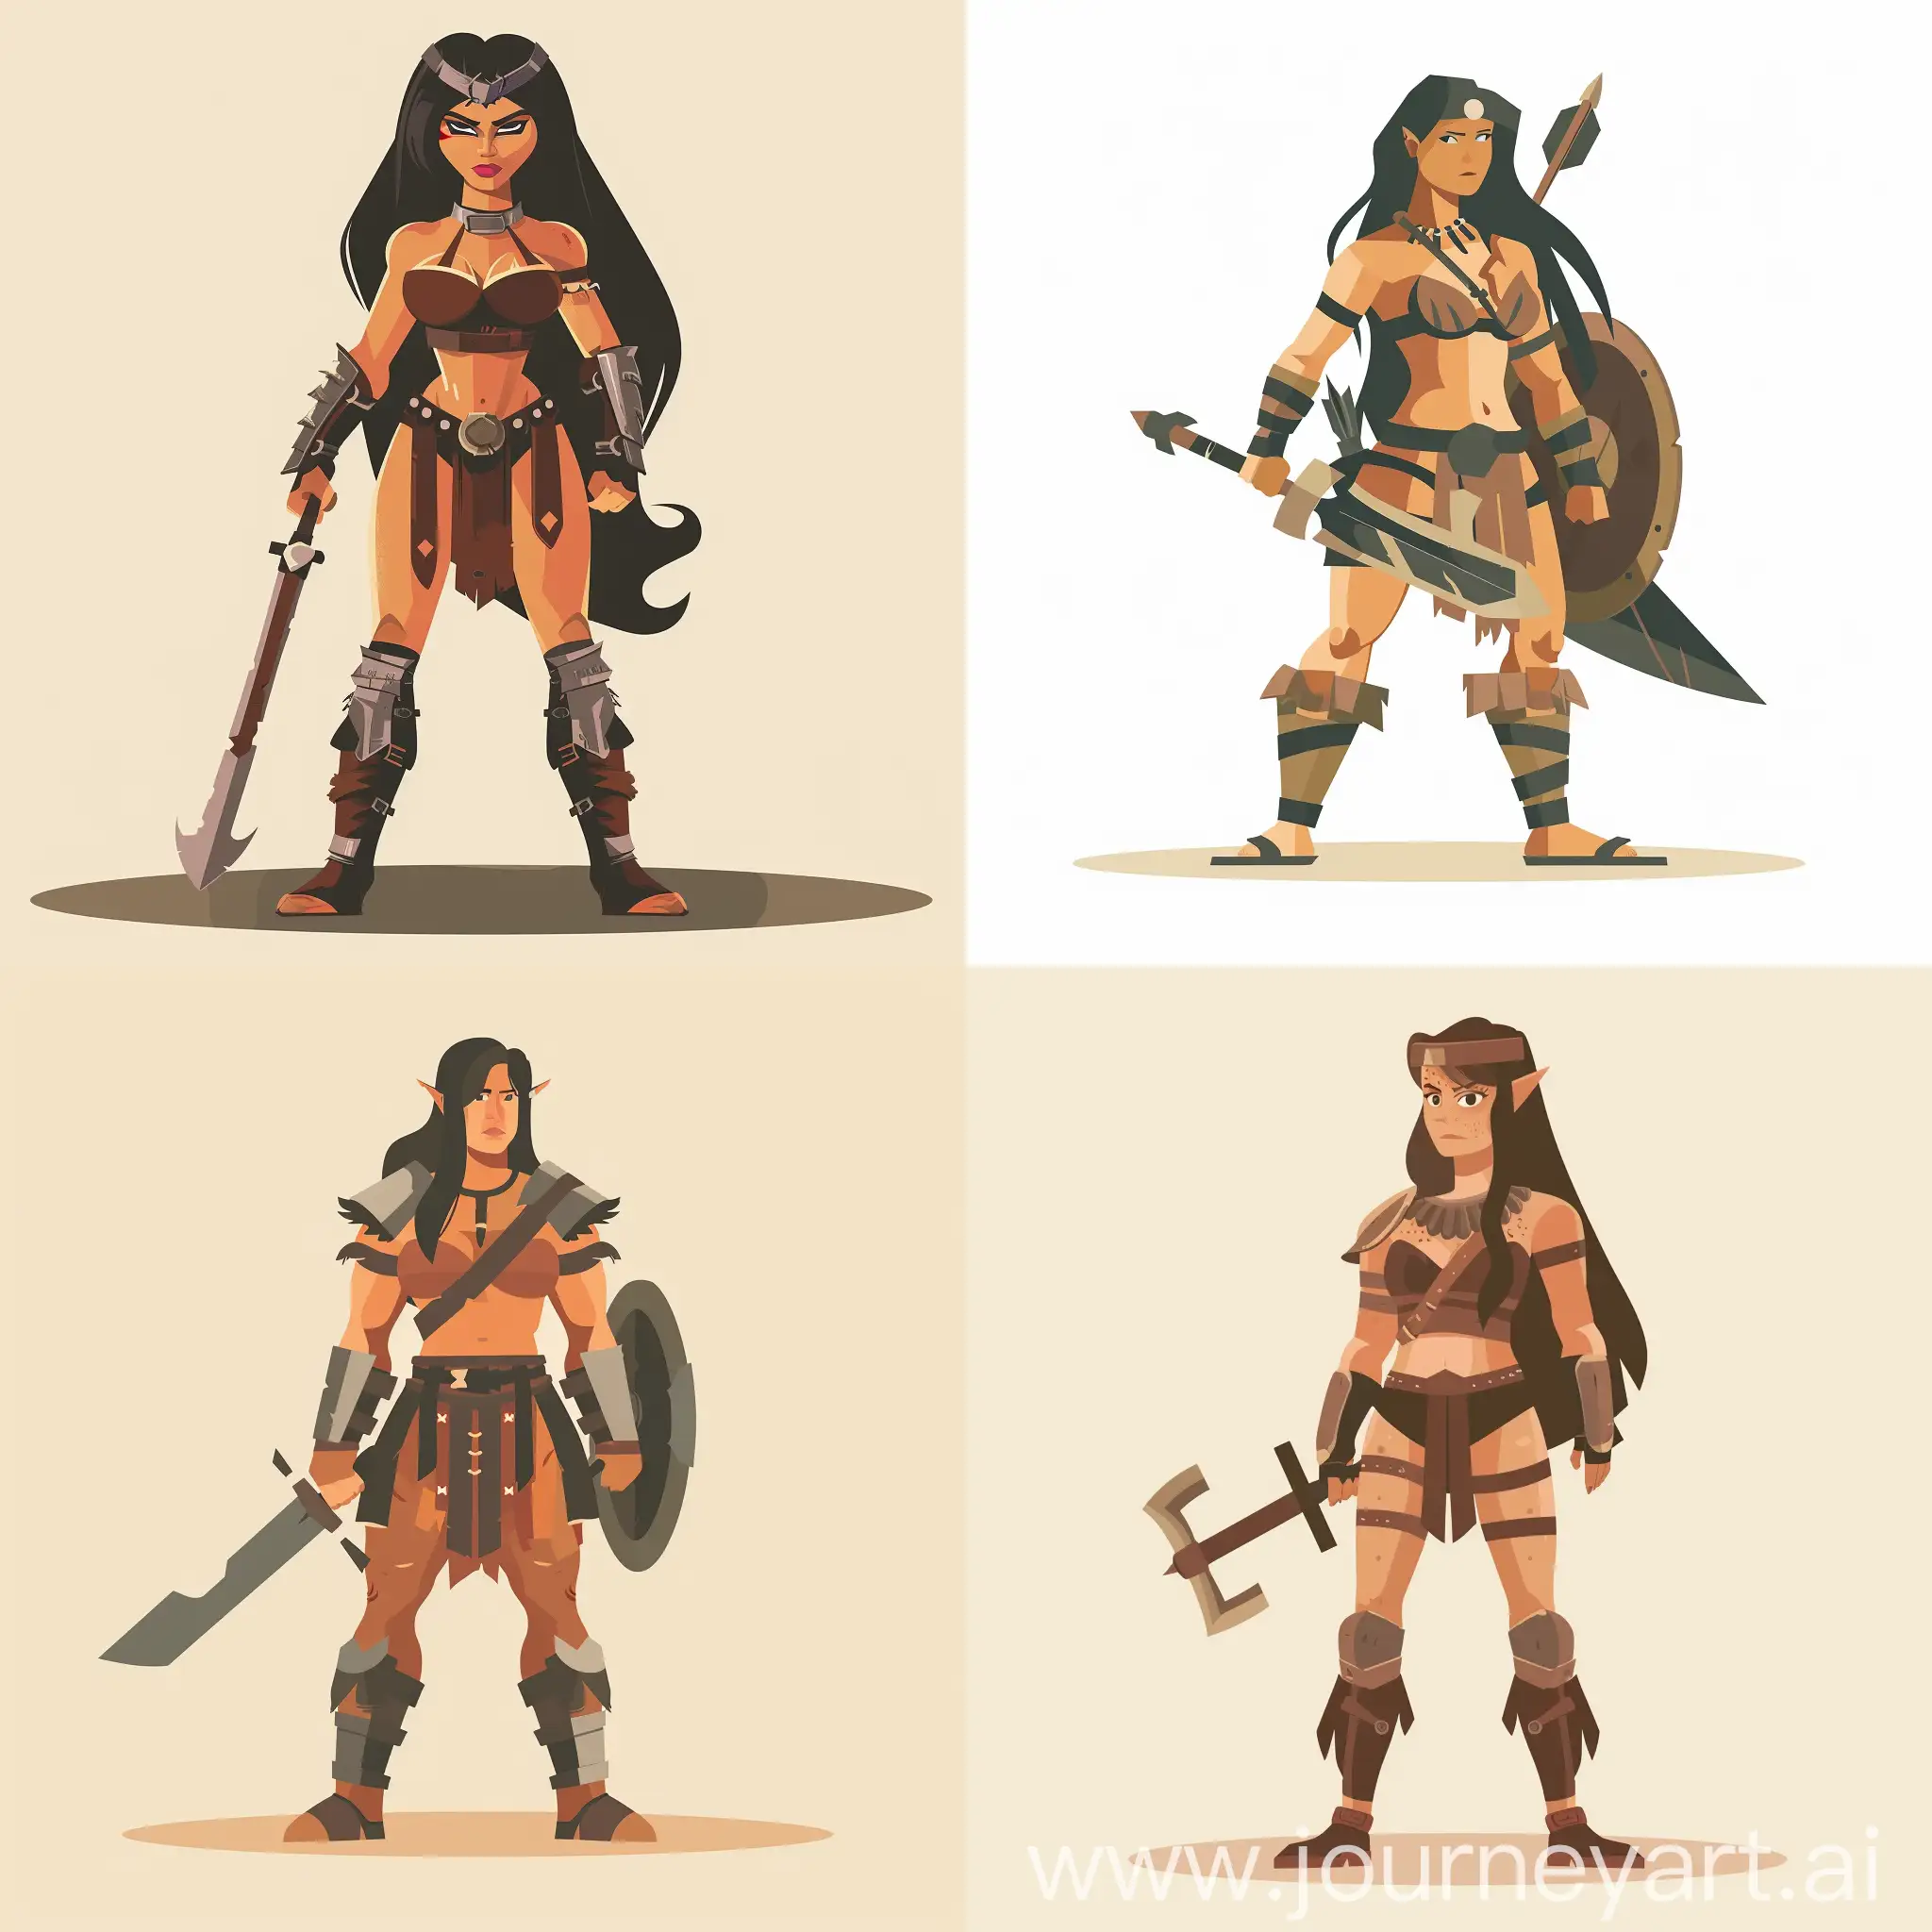 Powerful-Female-Barbarian-Warrior-Illustration-Inspired-by-Conan-the-Barbarian